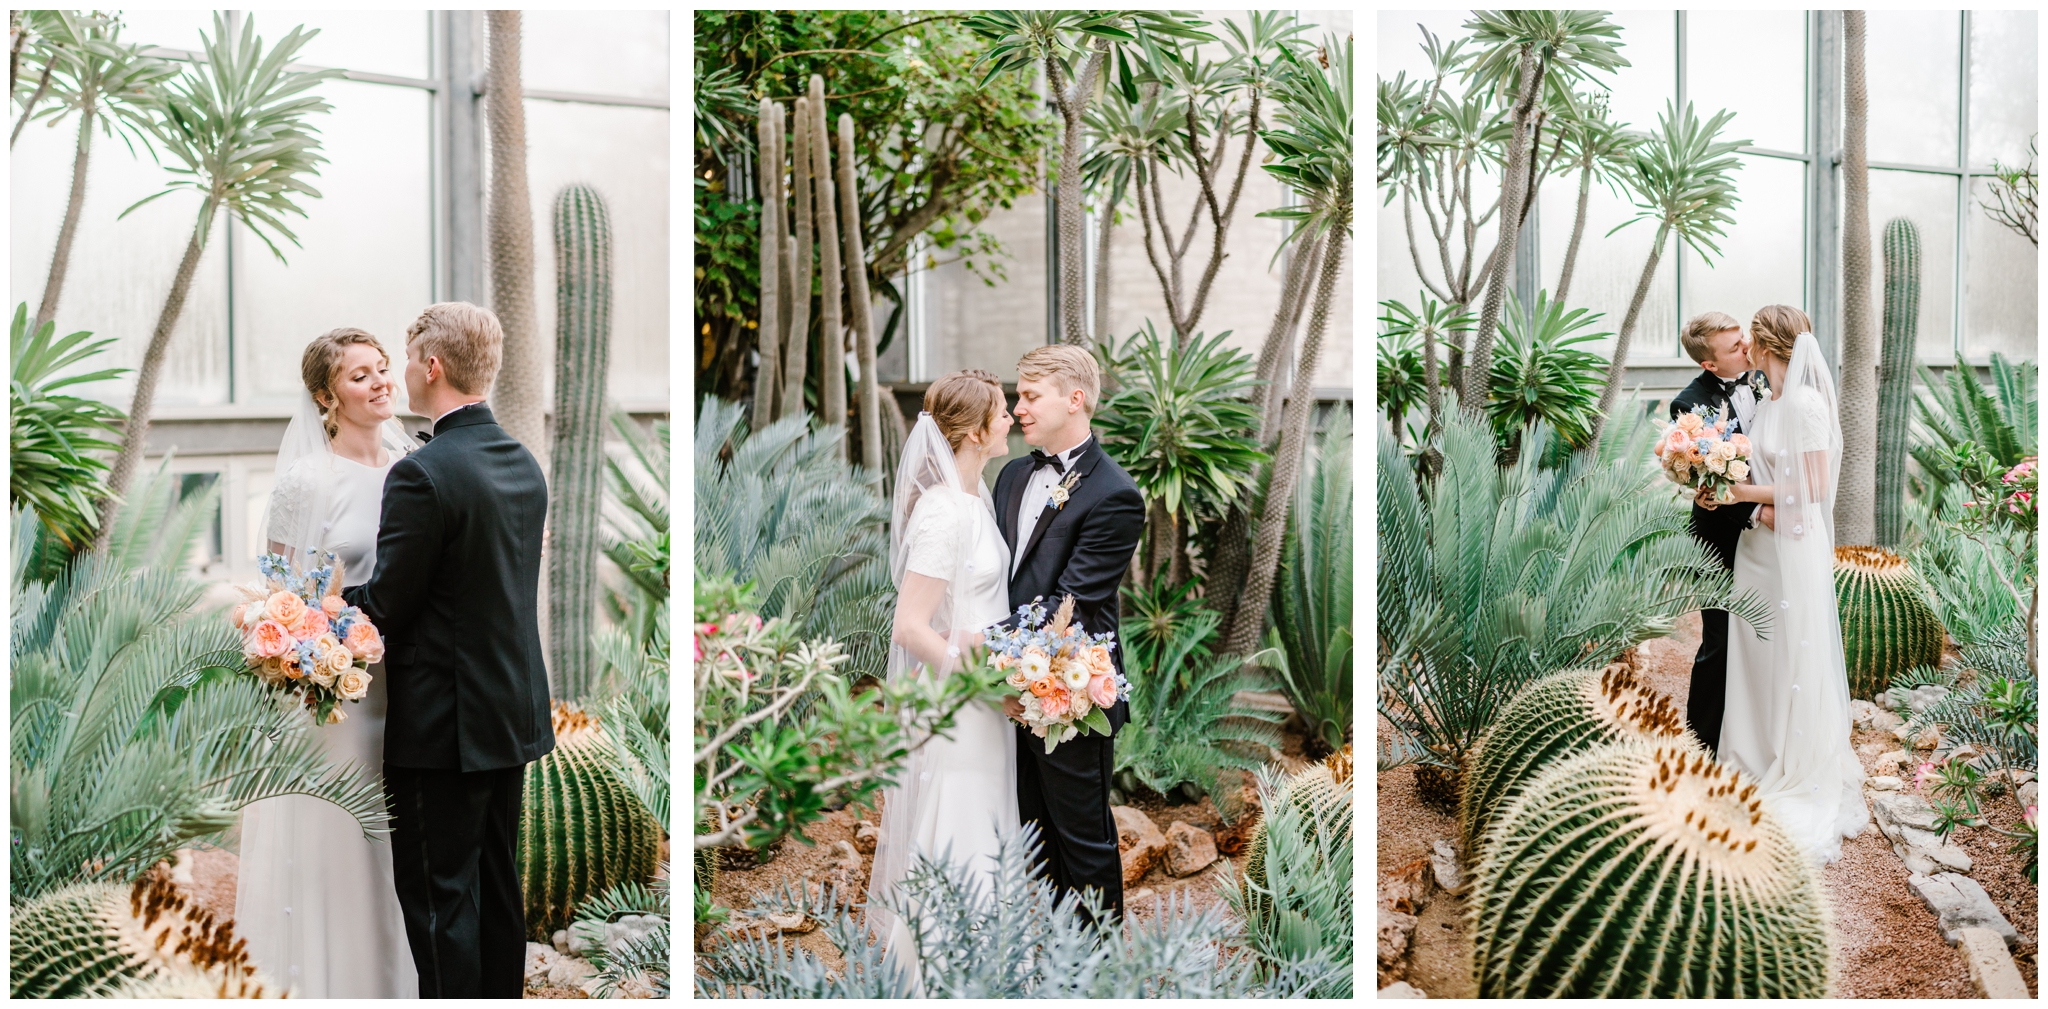 Blue, peach and orange fall wedding at The Greenhouse at Driftwood in Austin Texas | Joslyn Holtfort Photography